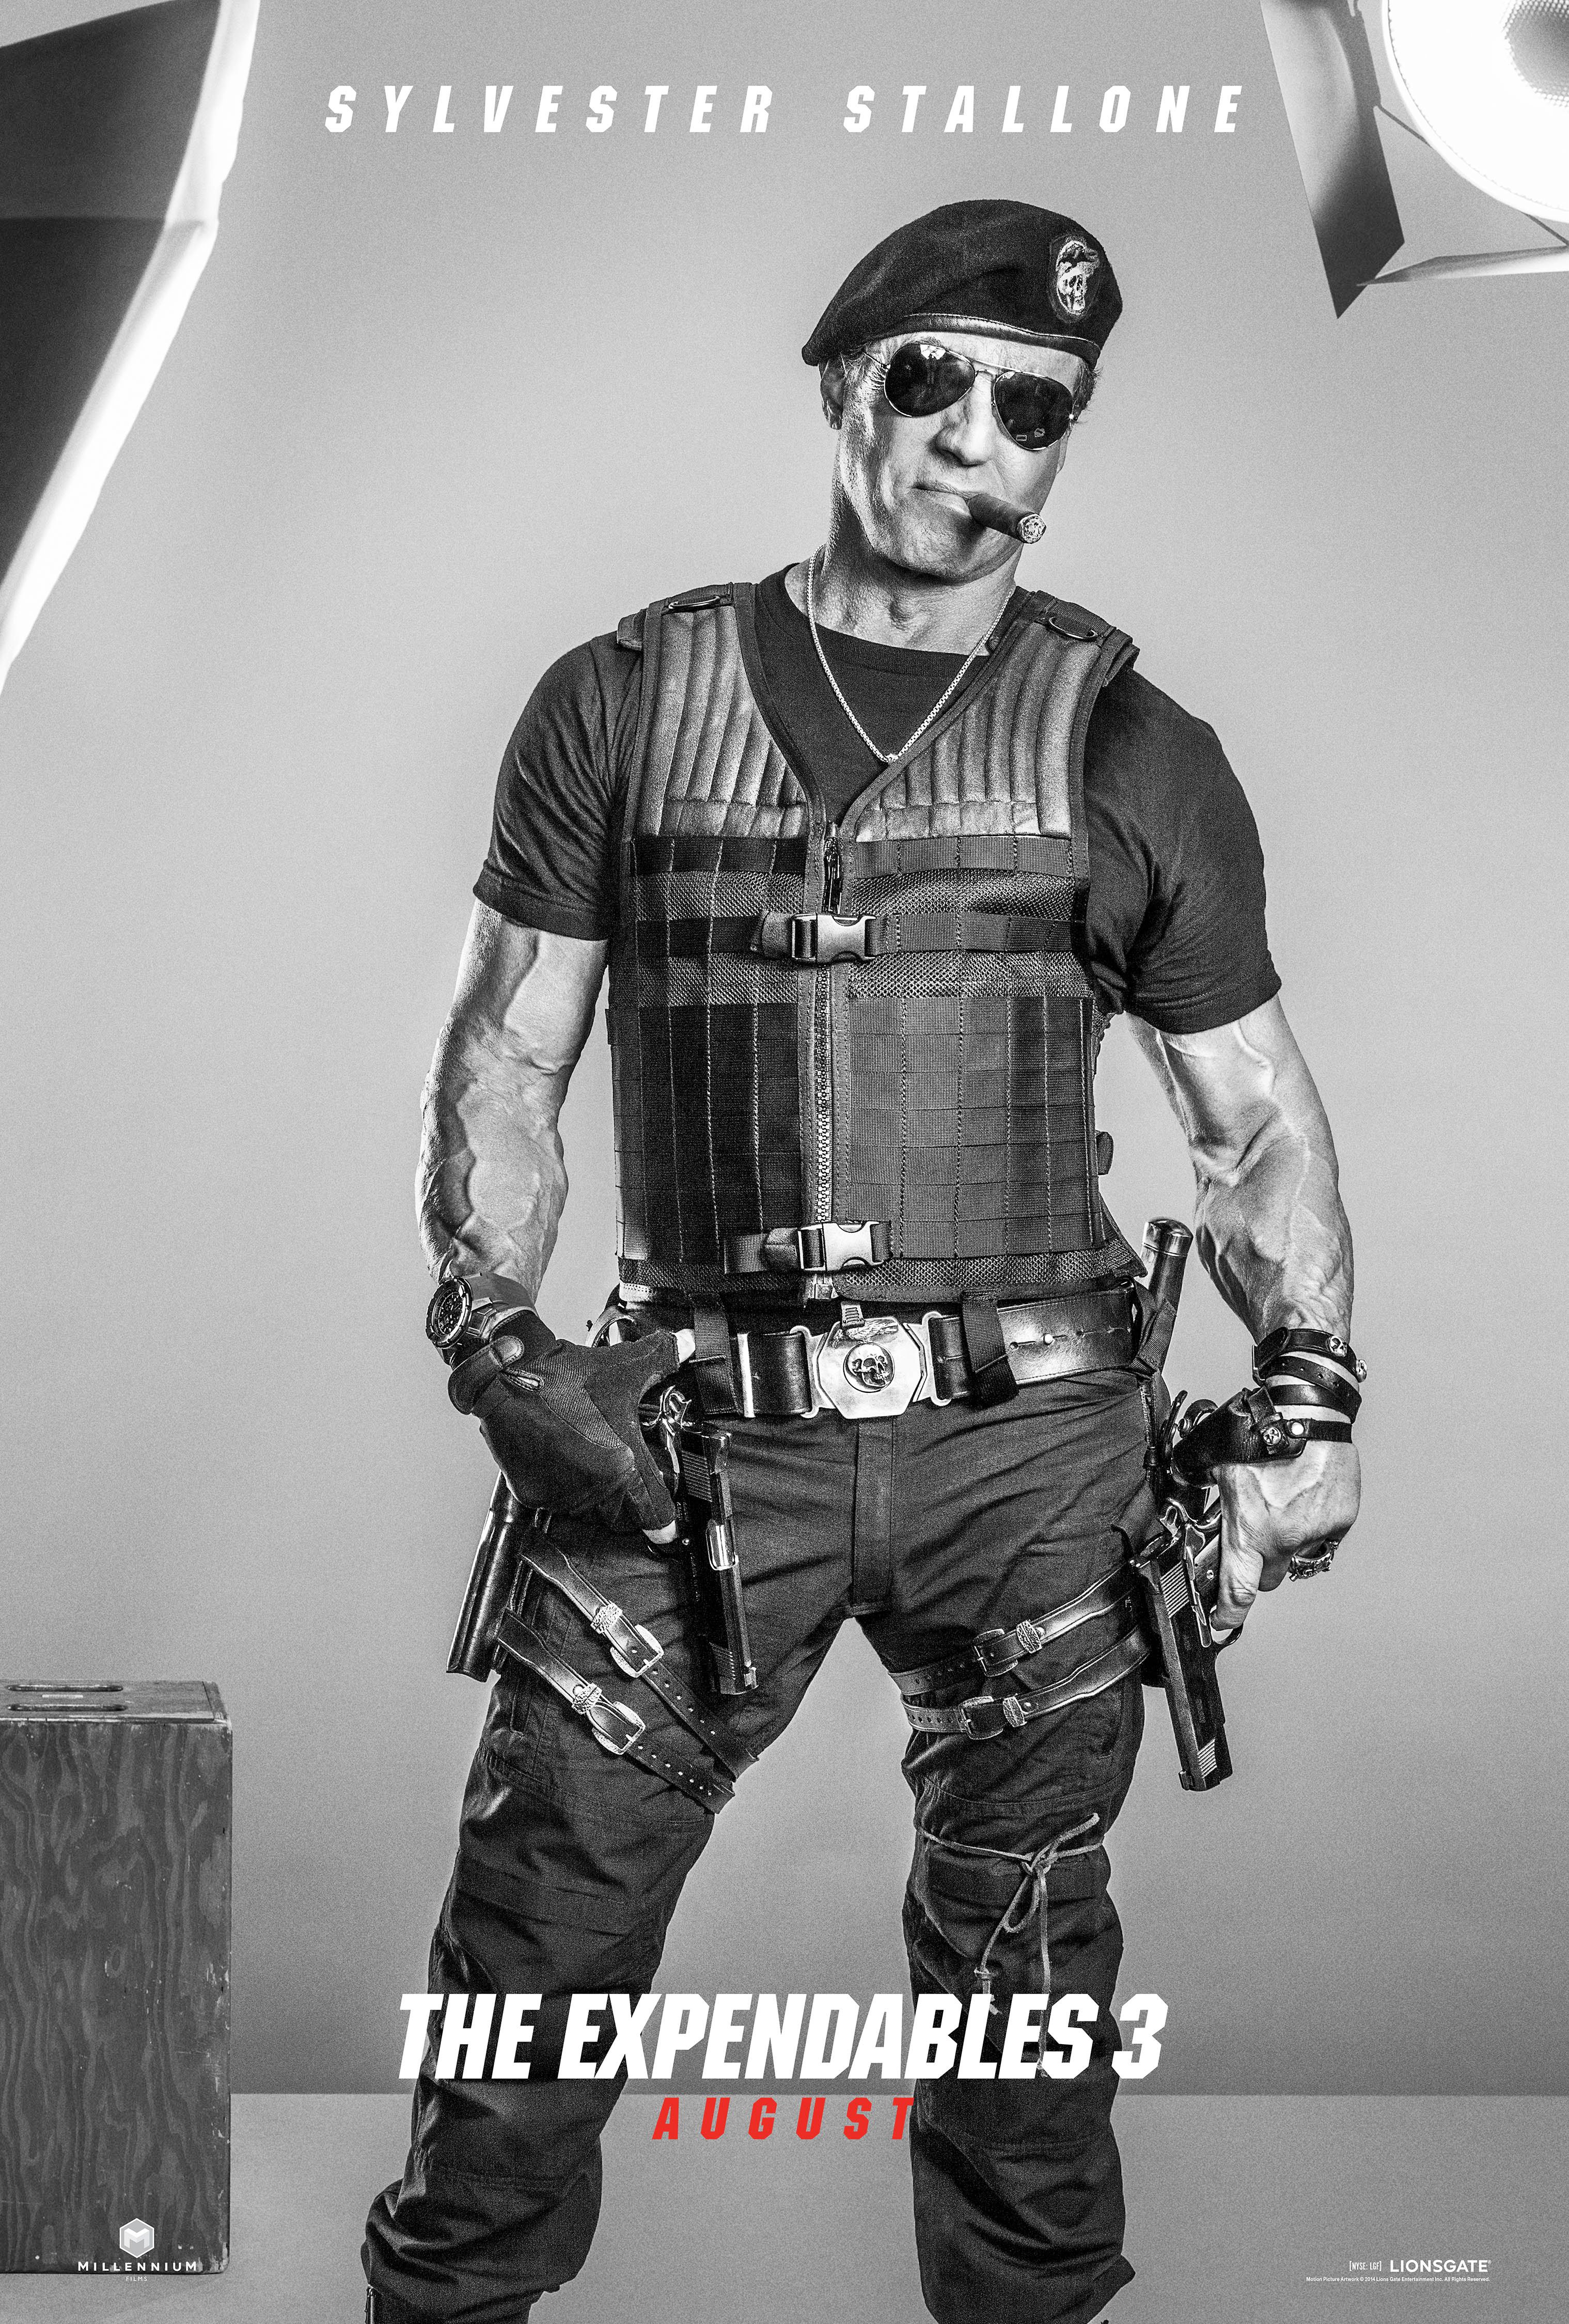 New EXPENDABLES 3 Image Features Sylvester Stallone, Wesley Snipes | Collider